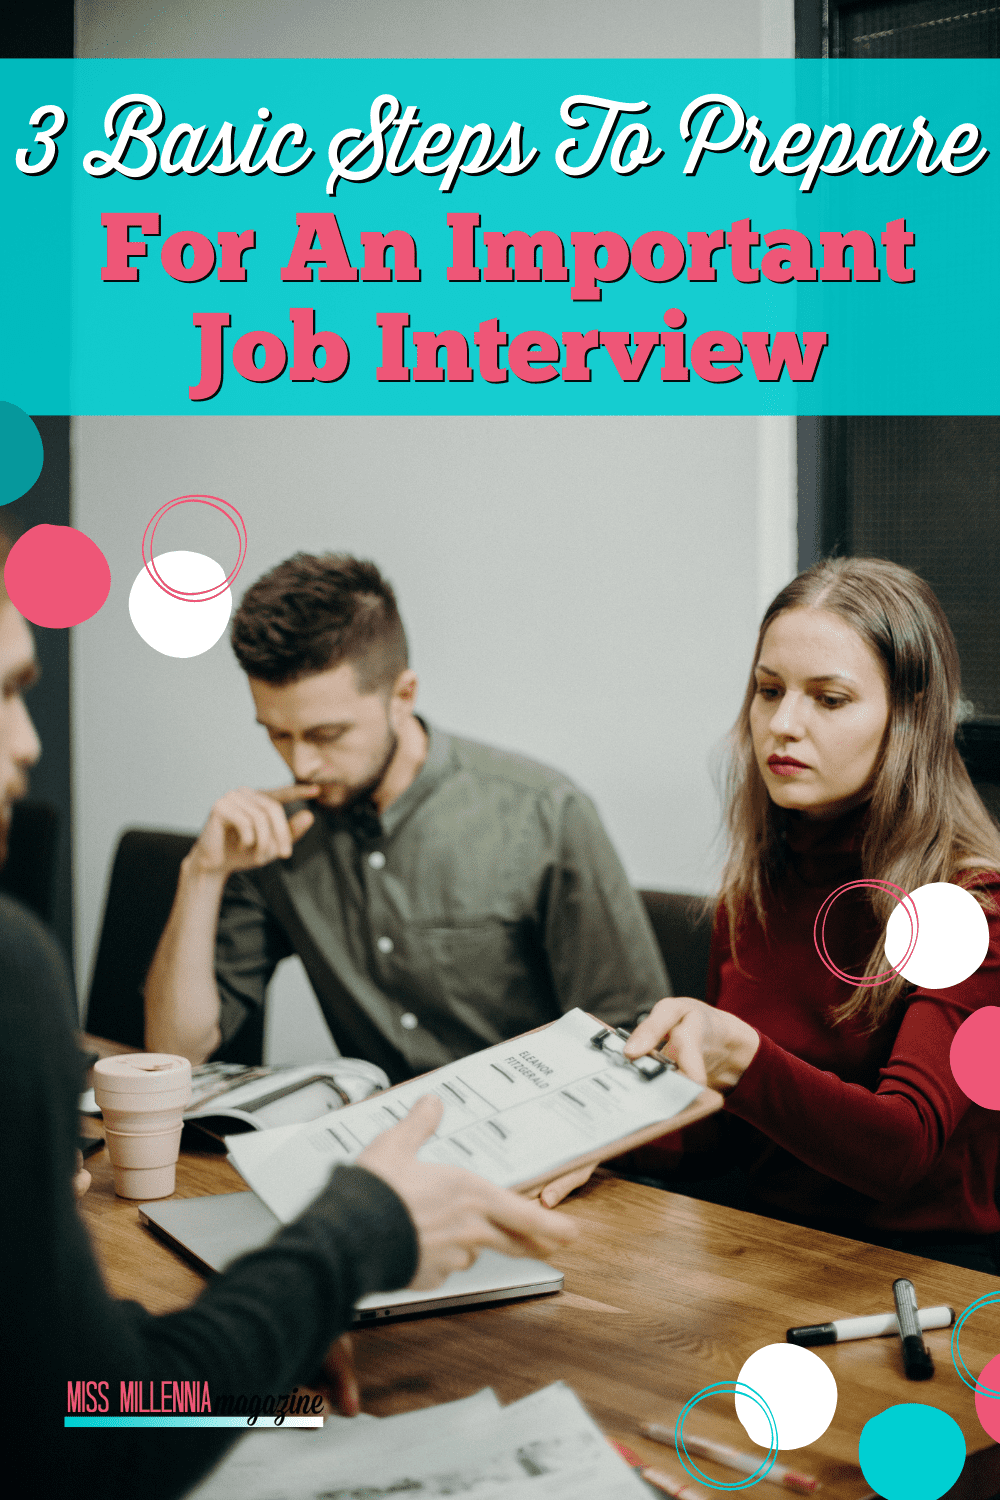 3 Basic Steps To Prepare For An Important Job Interview